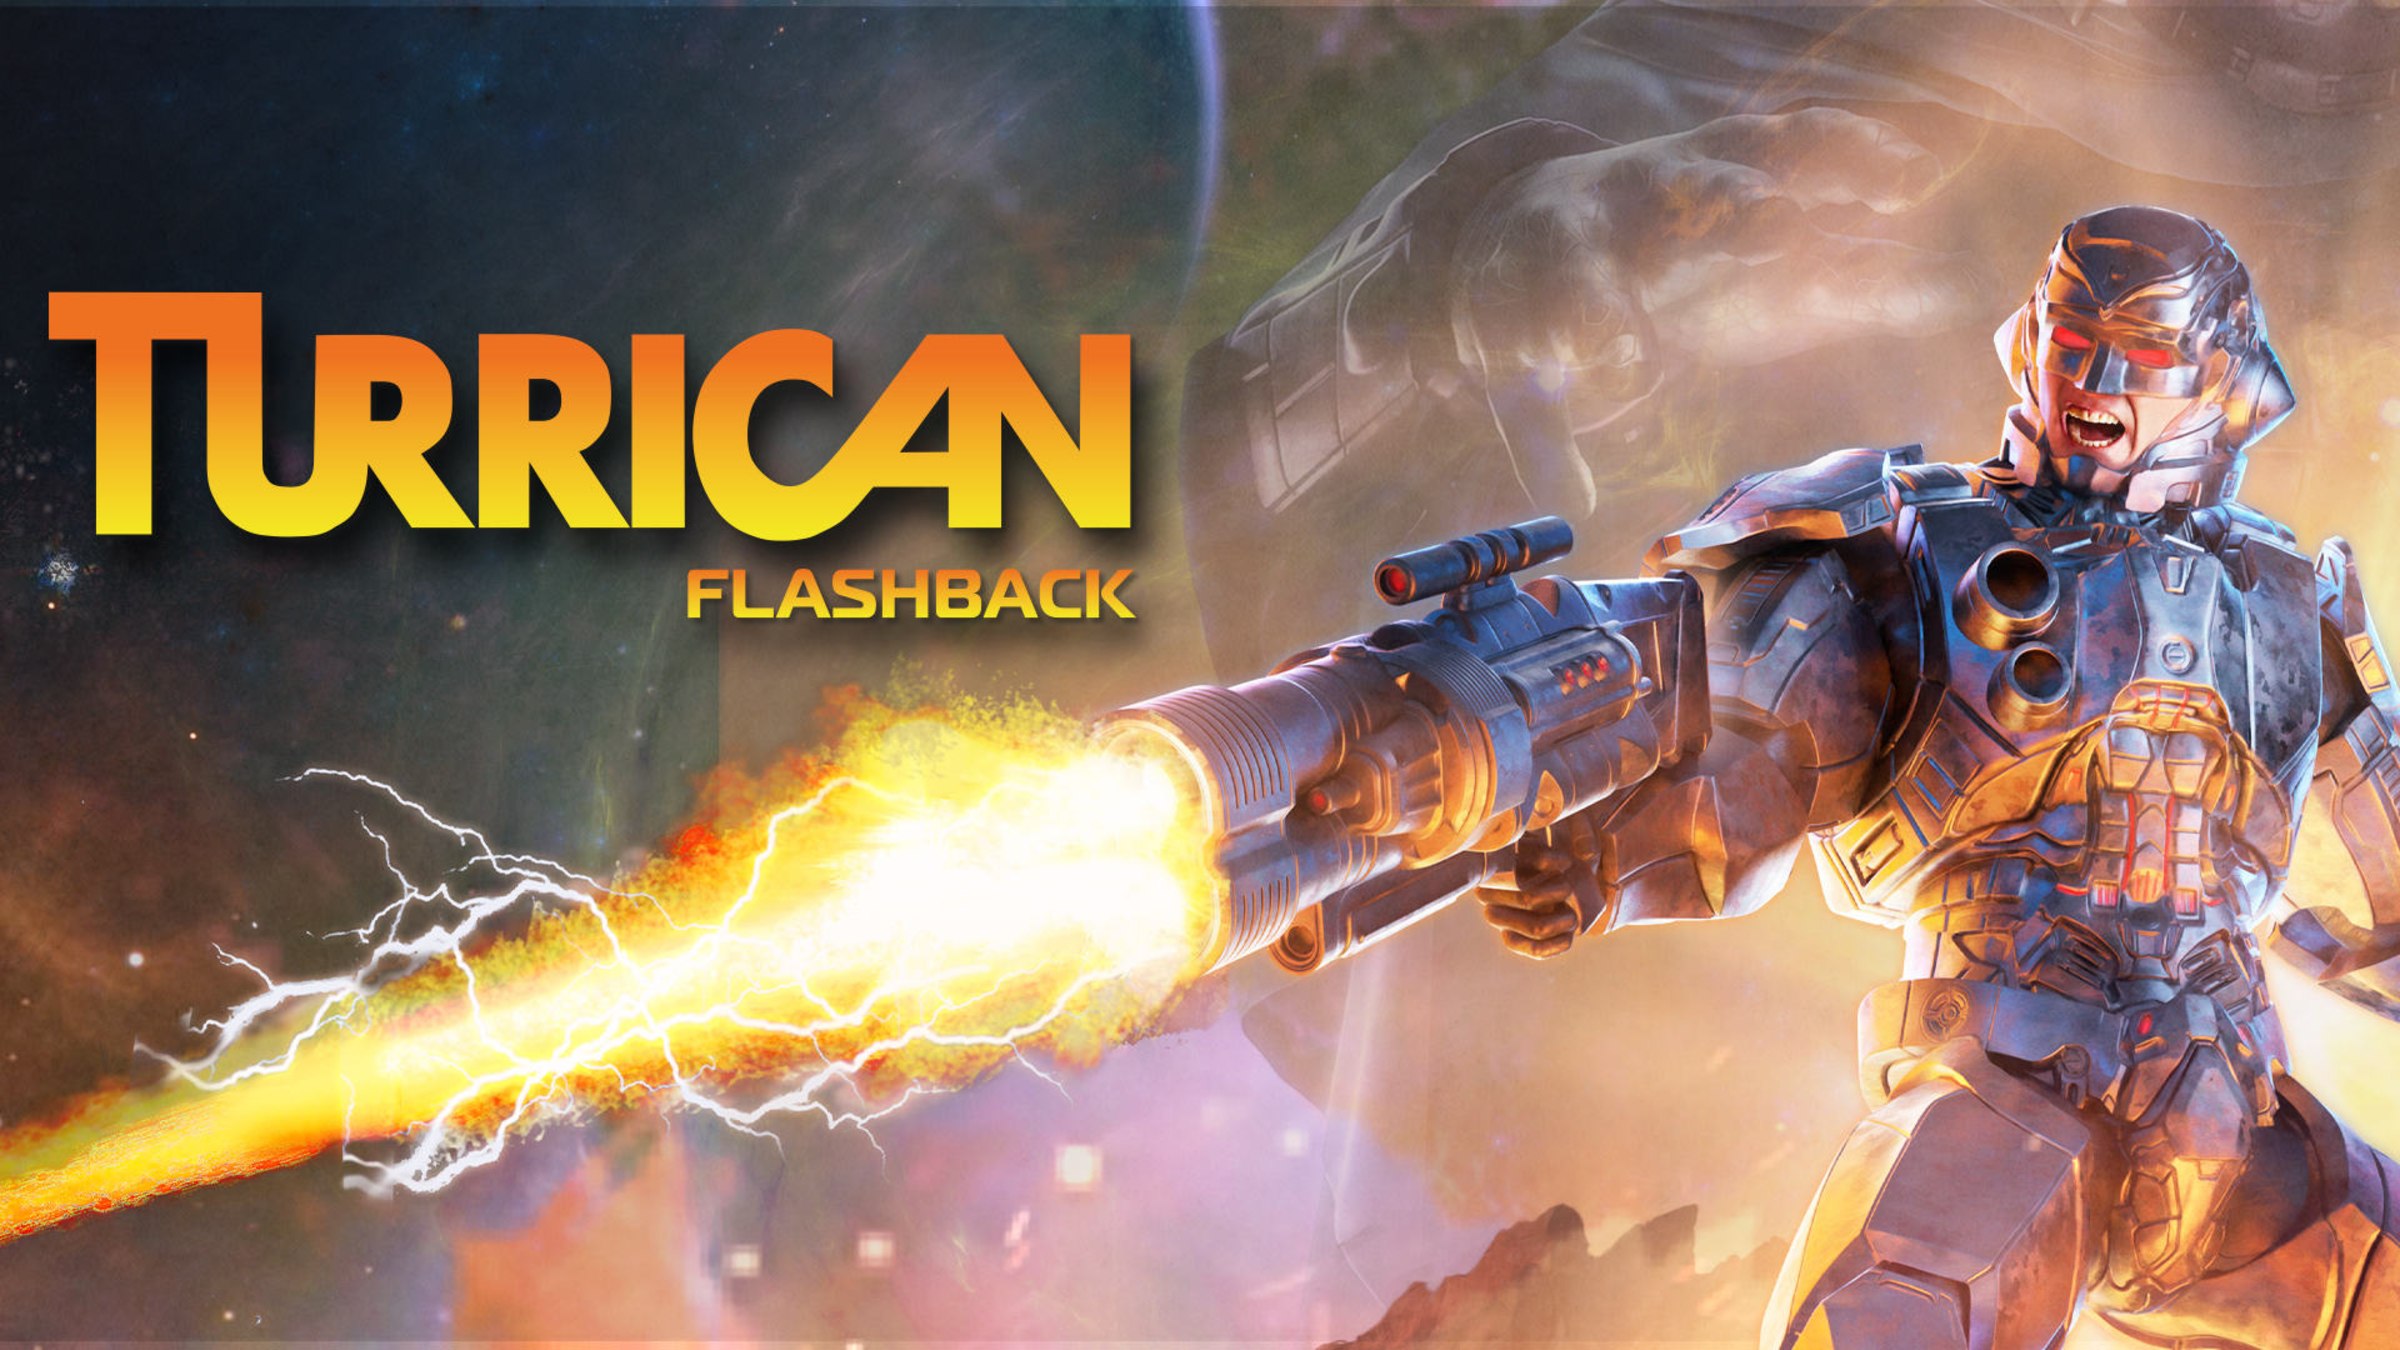 Turrican Switch Nintendo Site Official Flashback for Nintendo -